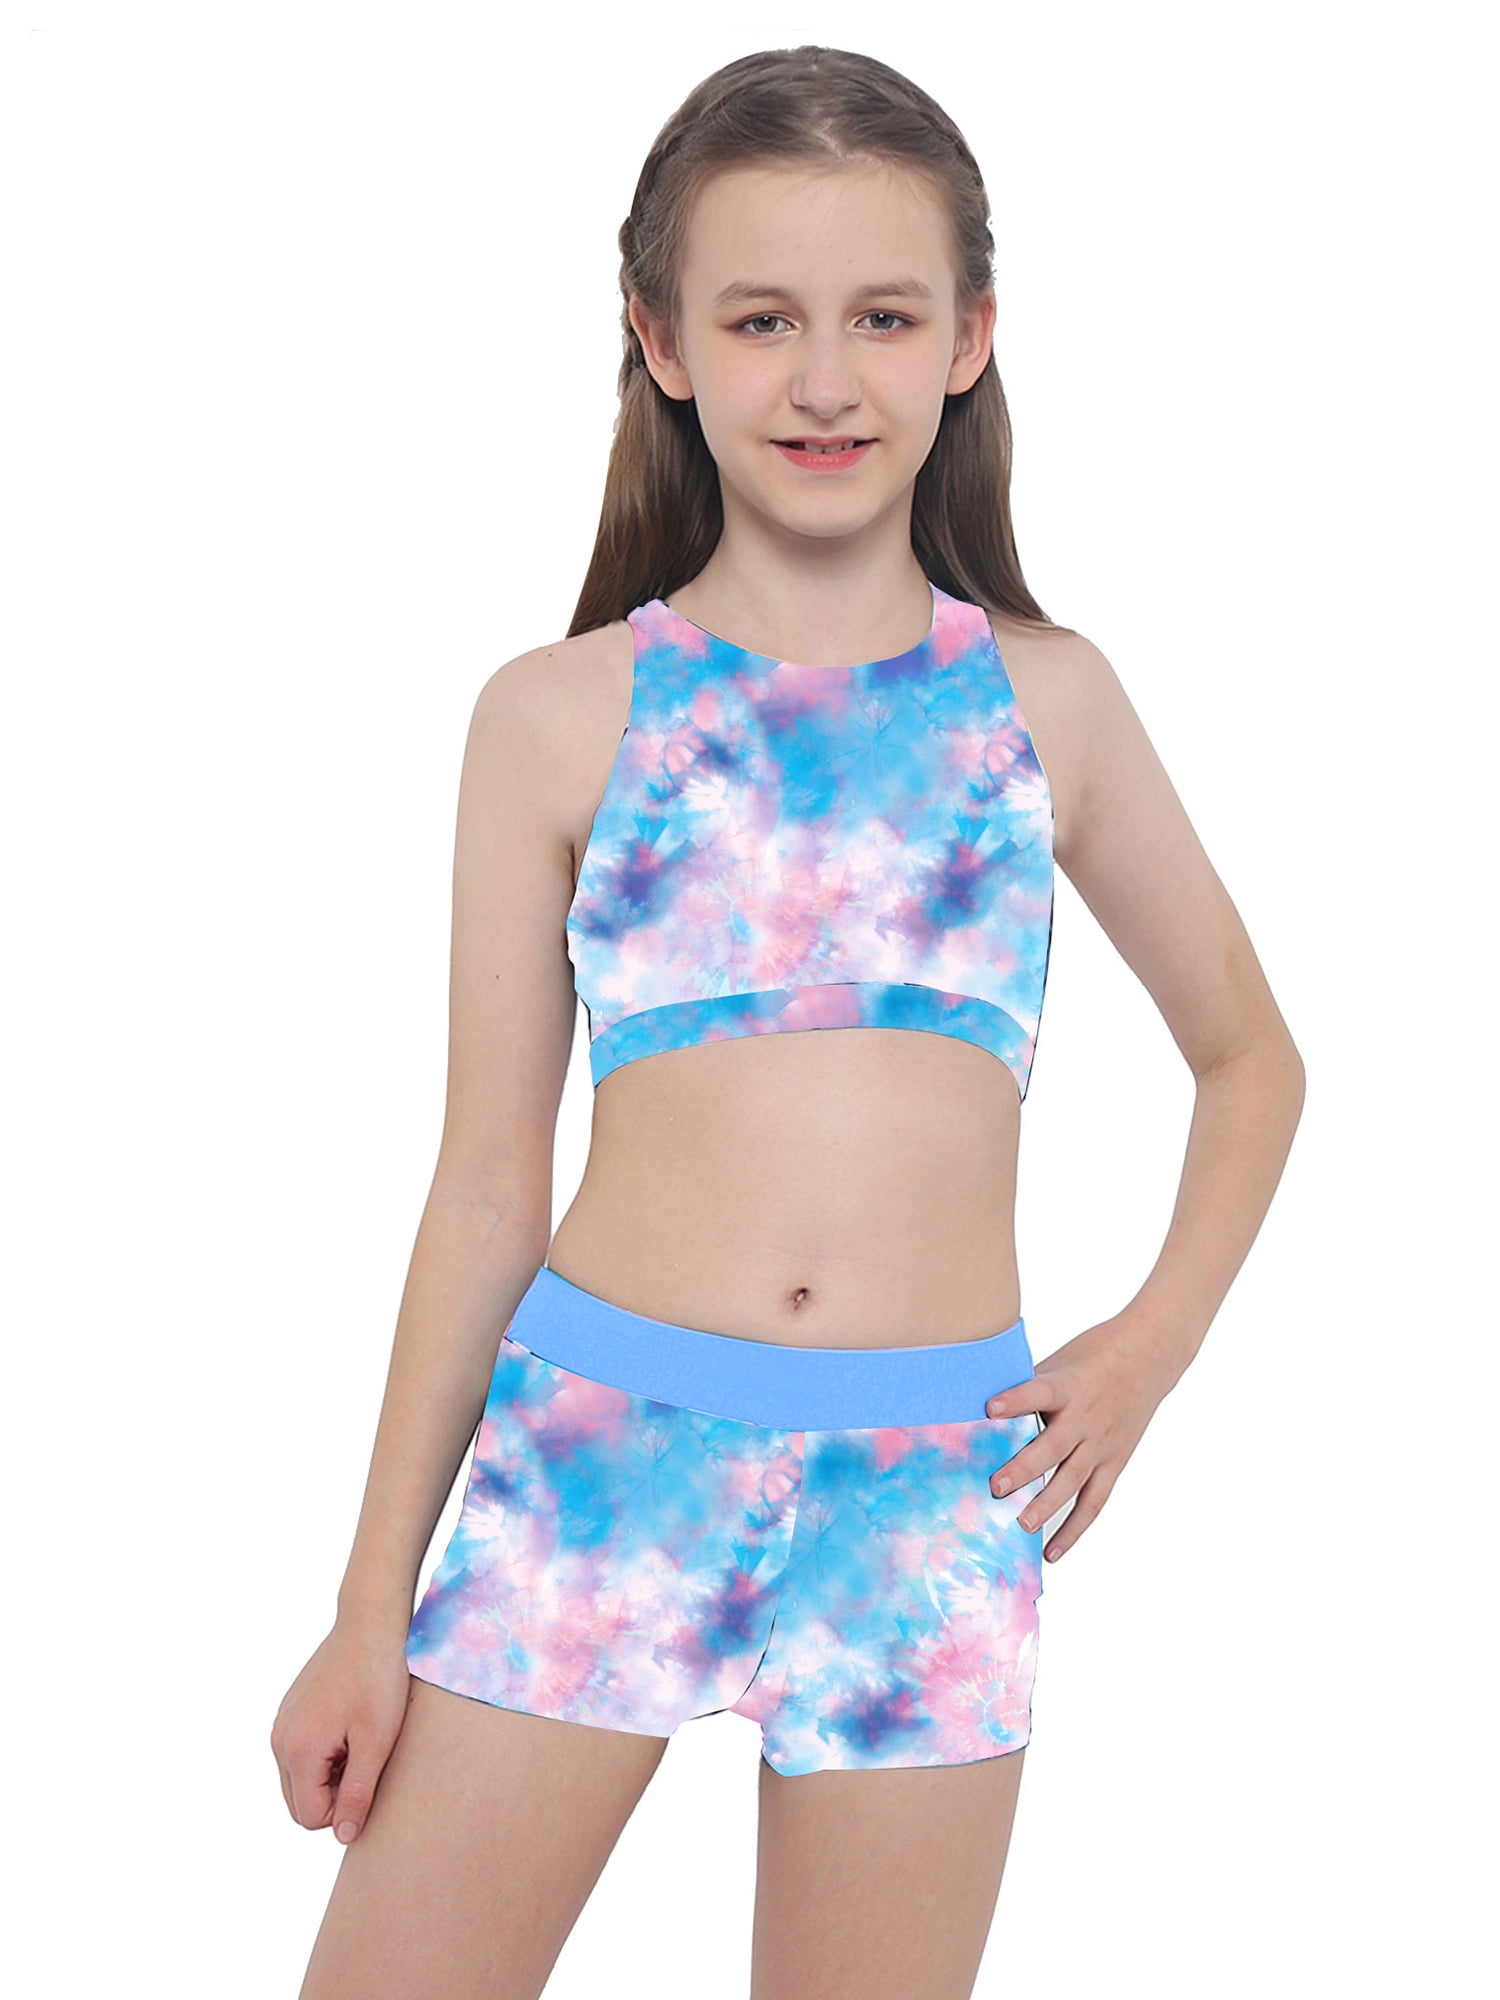 CHICTRY Kids Girls Two Piece Dance Outfit Crop Top with Shorts Set  Activewear Pink 14 